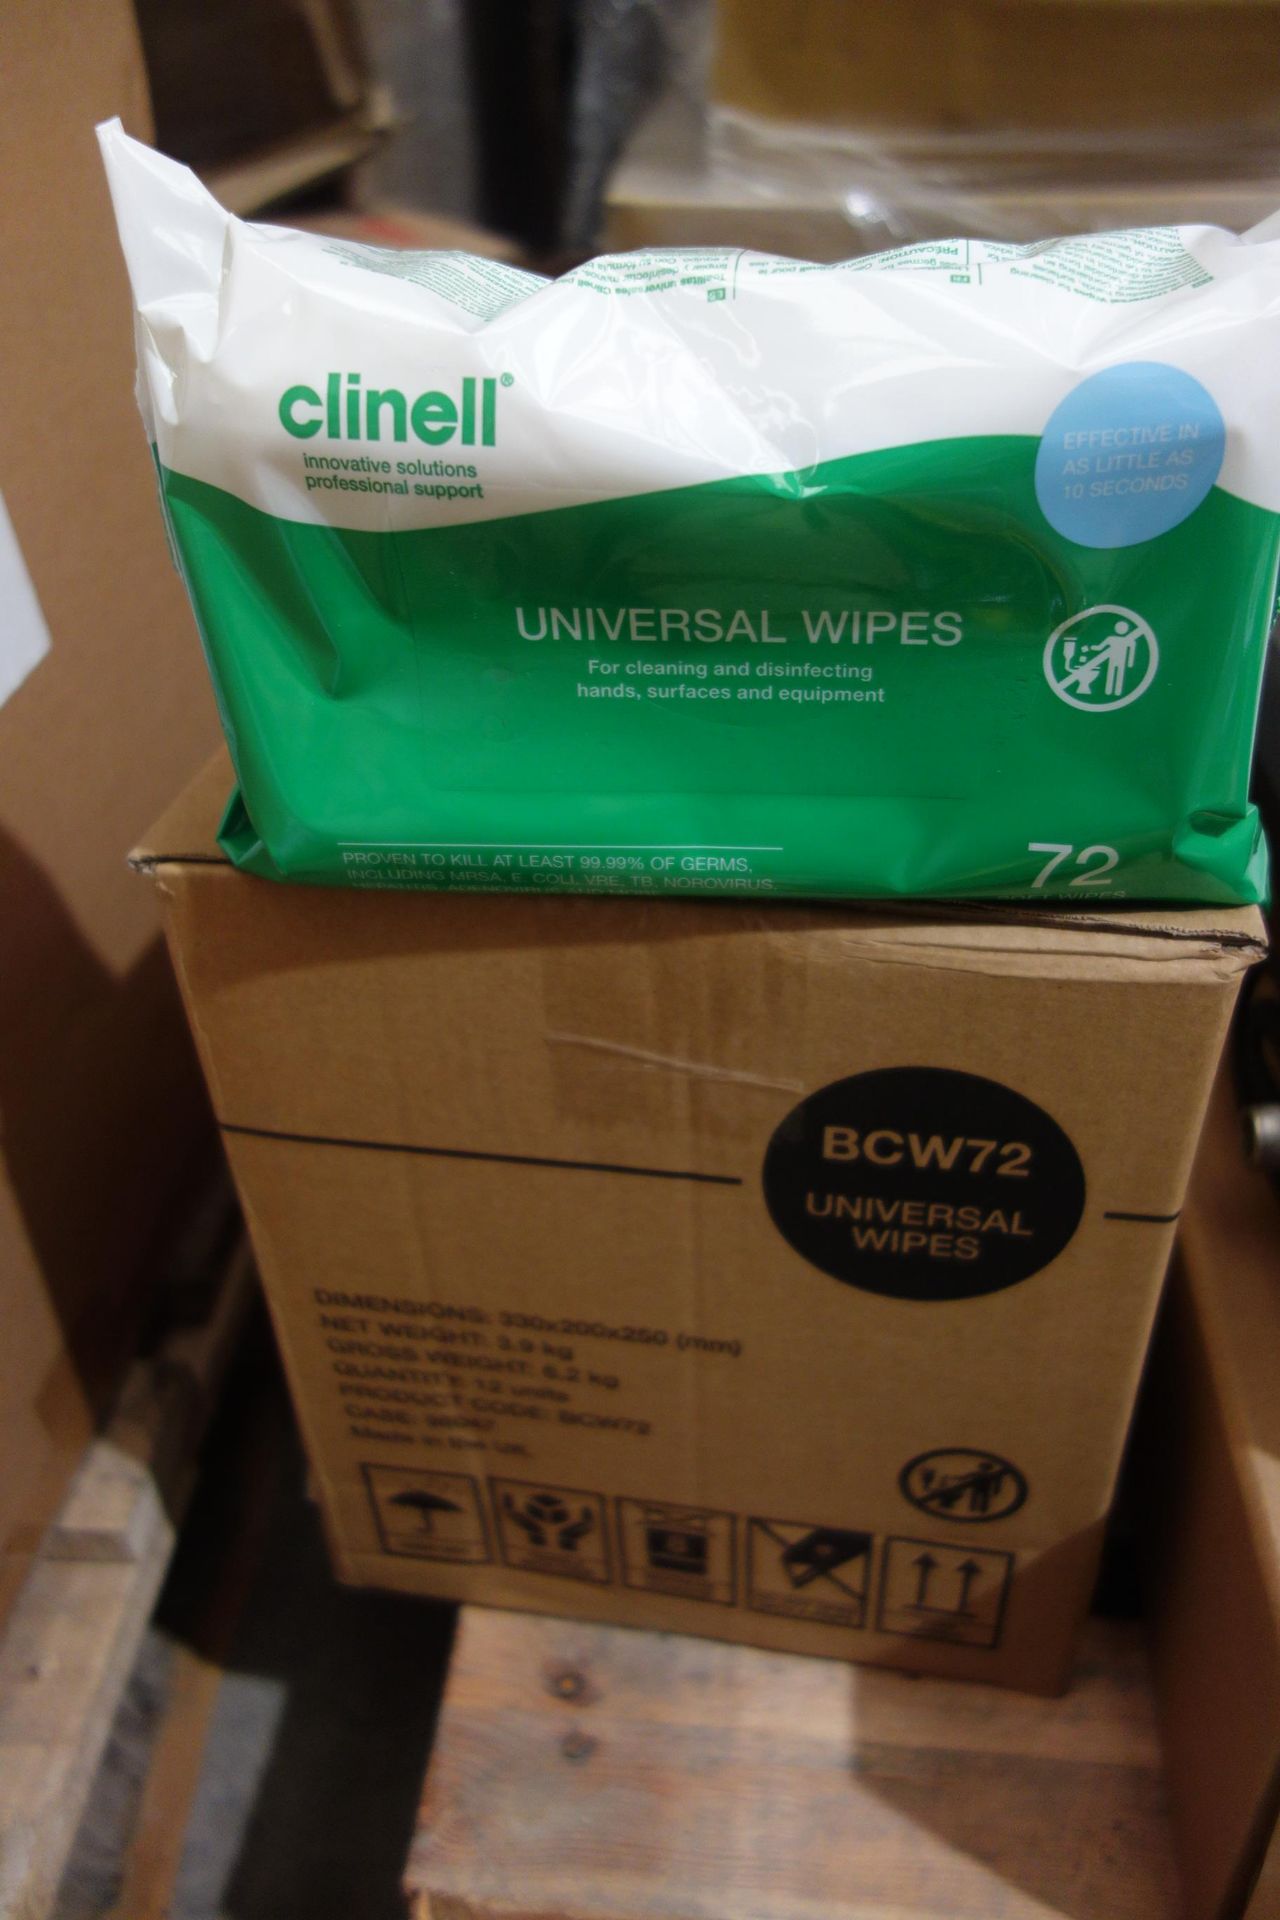 40 x Boxes of CLINELL BCW72 Universal Wipes for Cleaning and Disinfecting Hands, Surfaces and